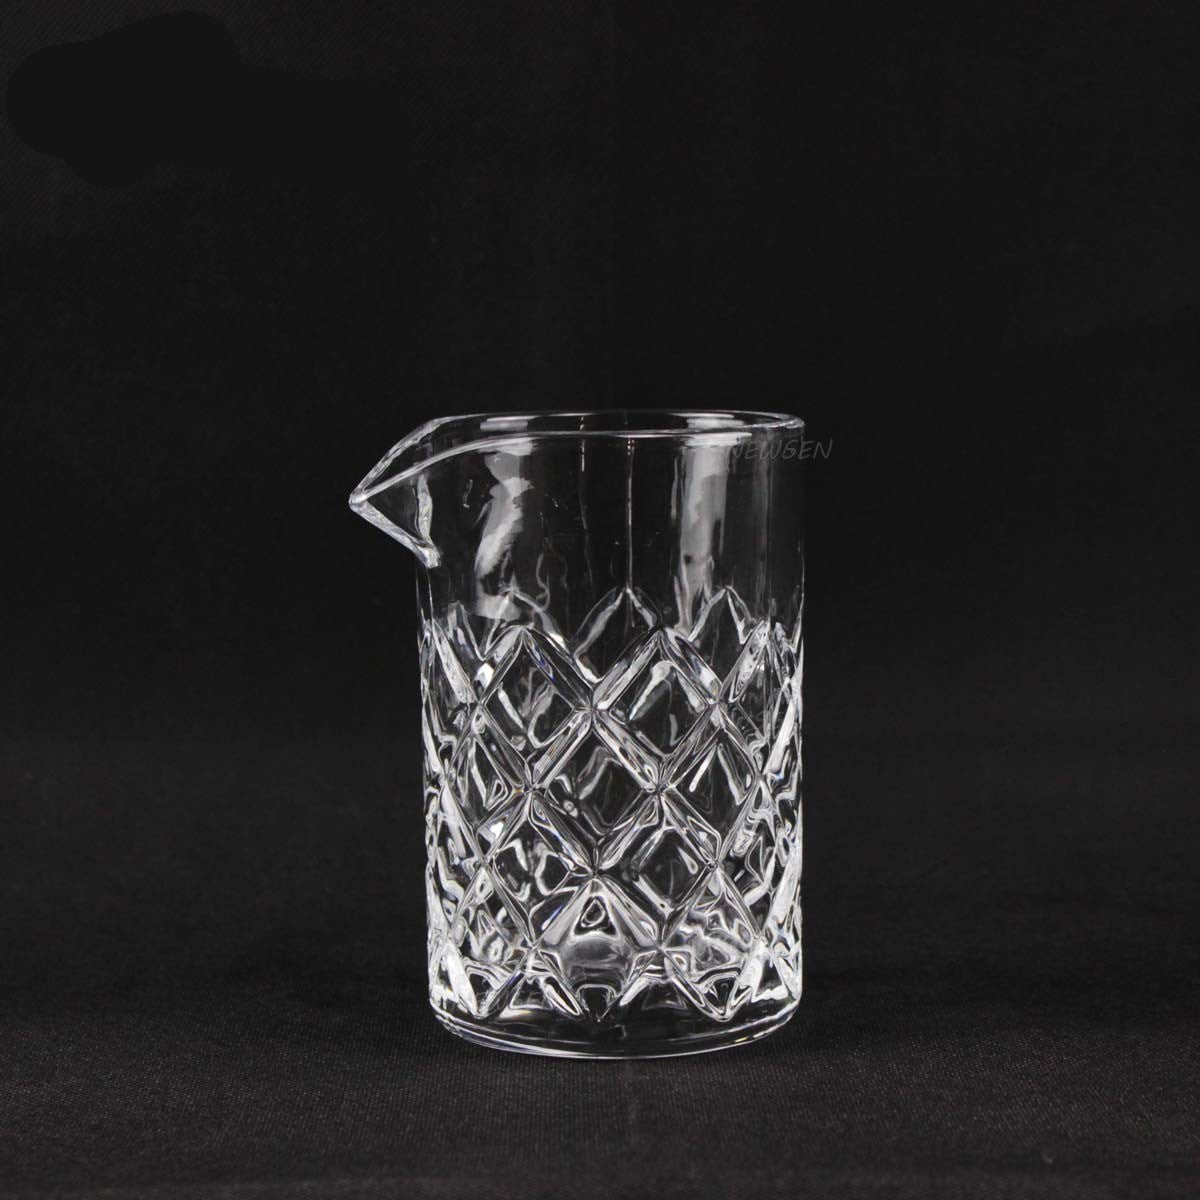 Carved crystal cocktail glass